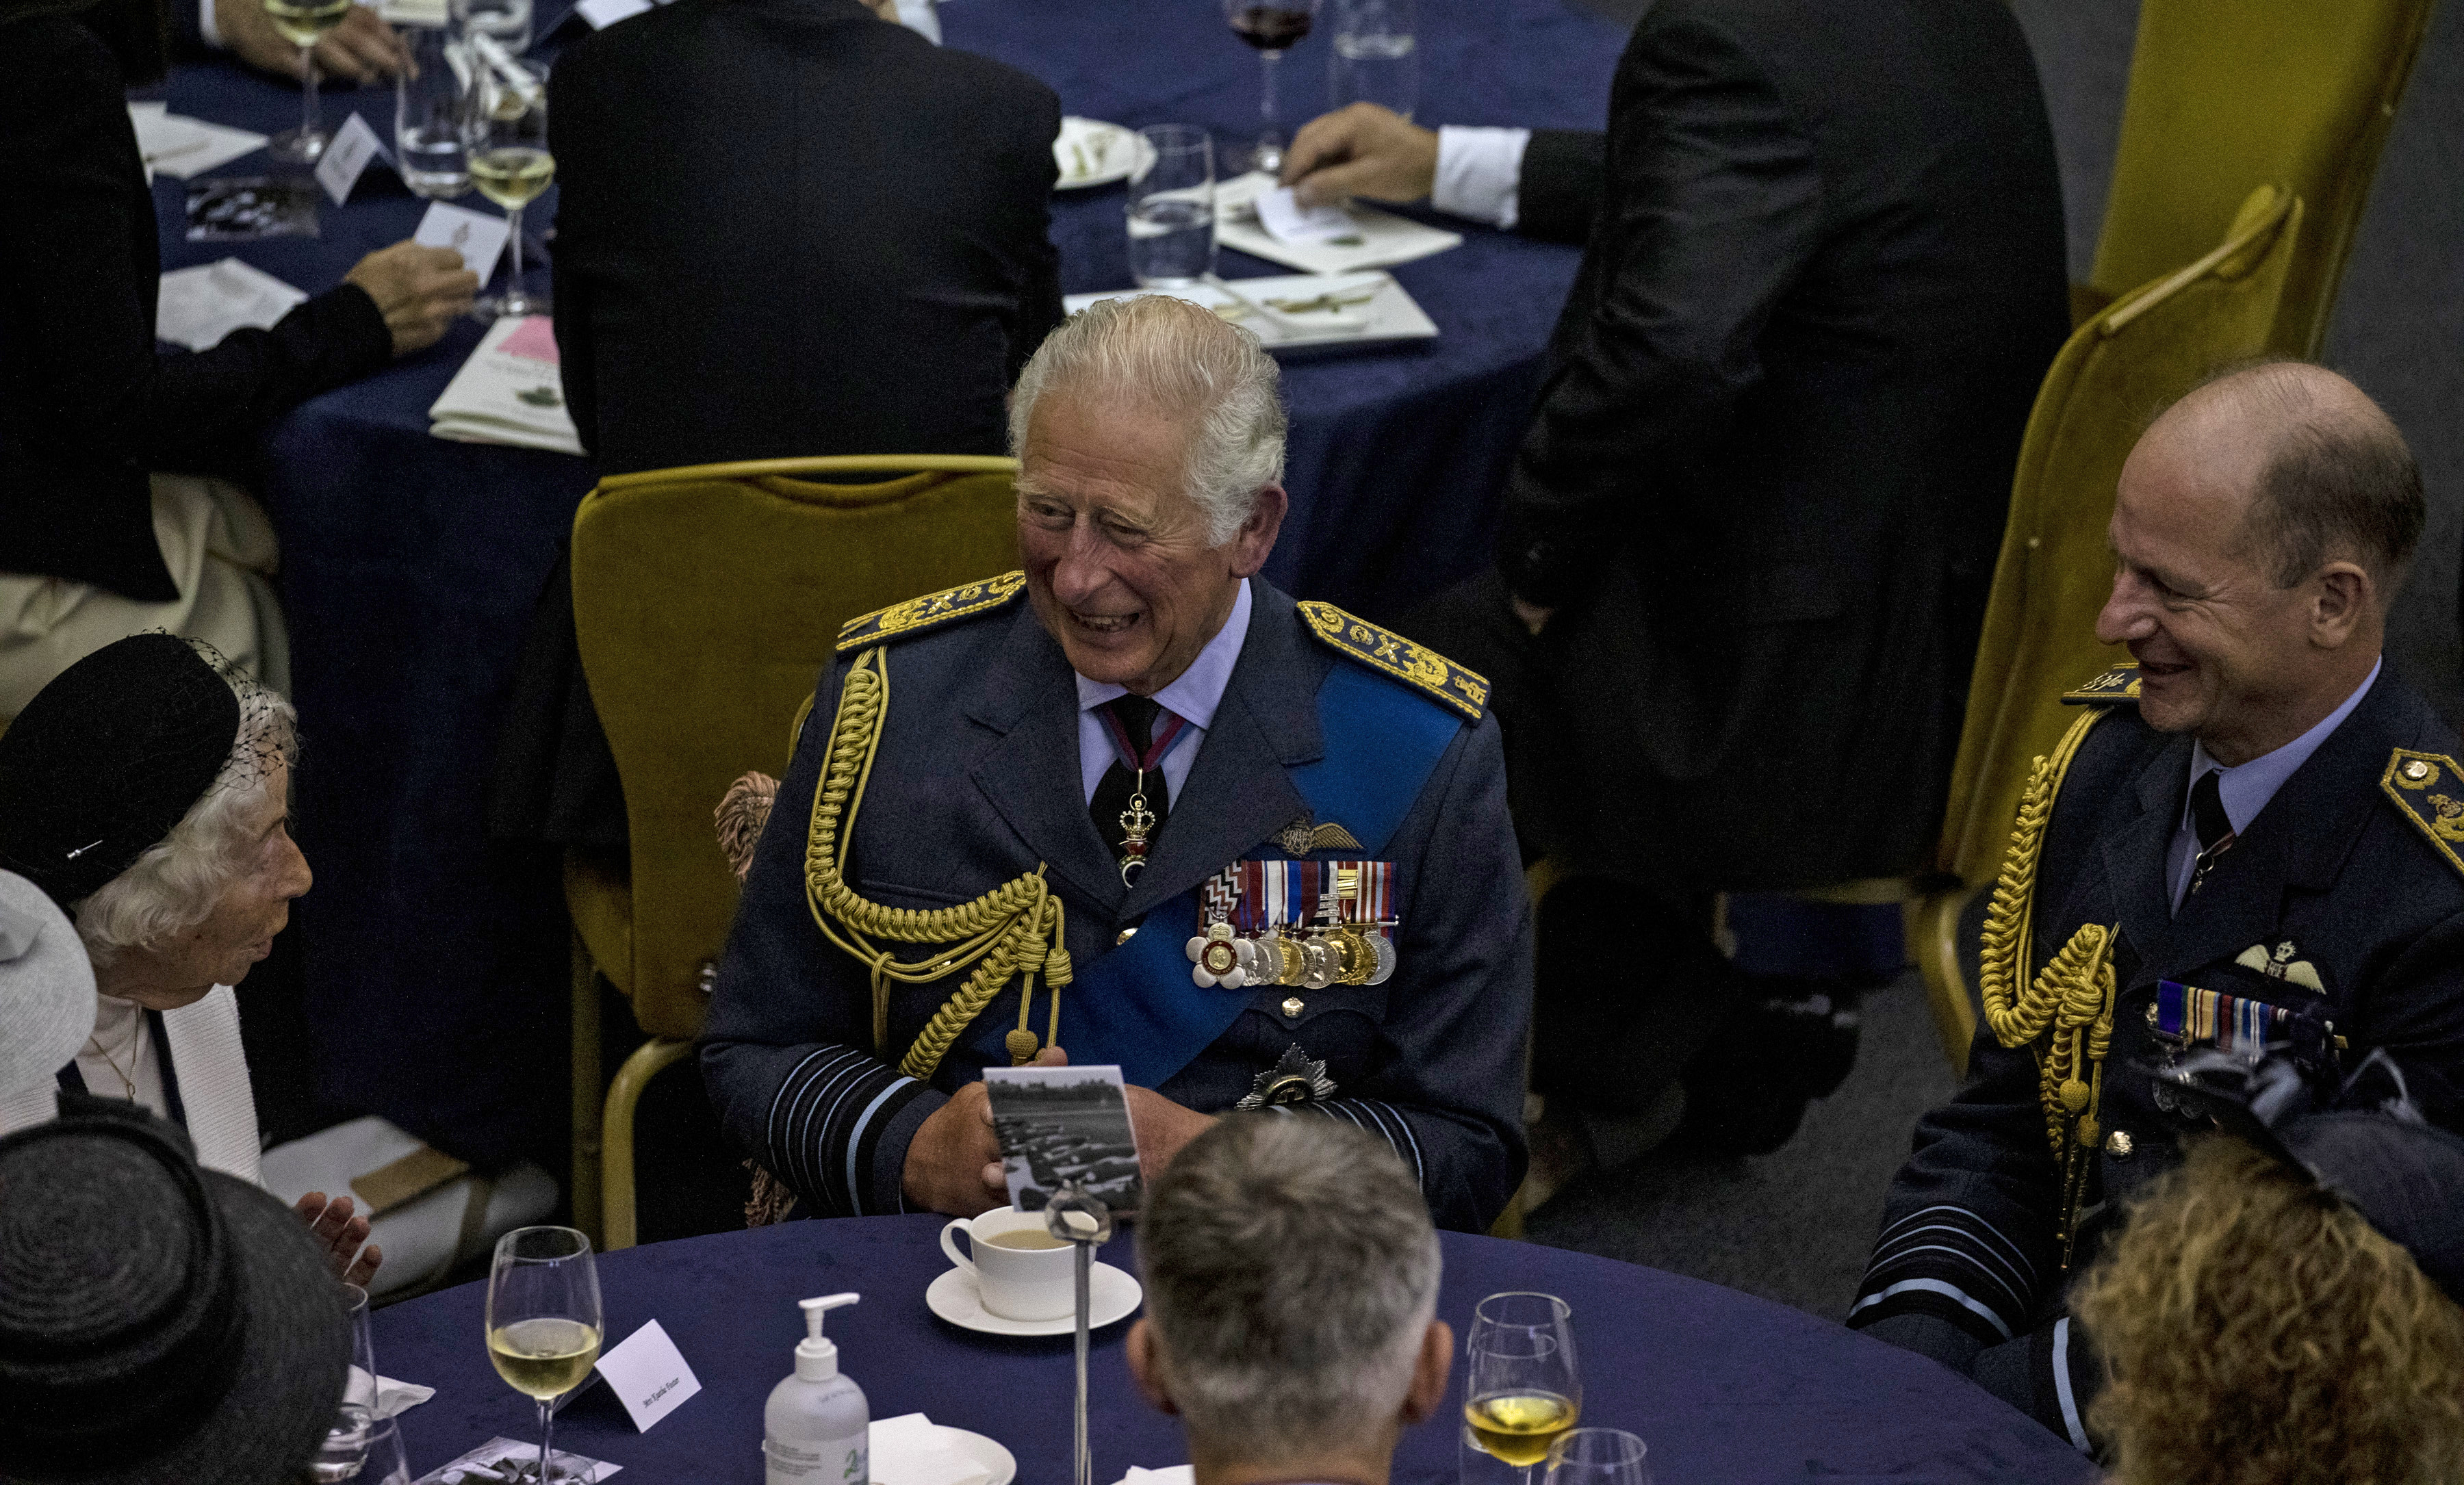 His Royal Highness sits at a table with Air Chief Marshal Mike Wigston and others.